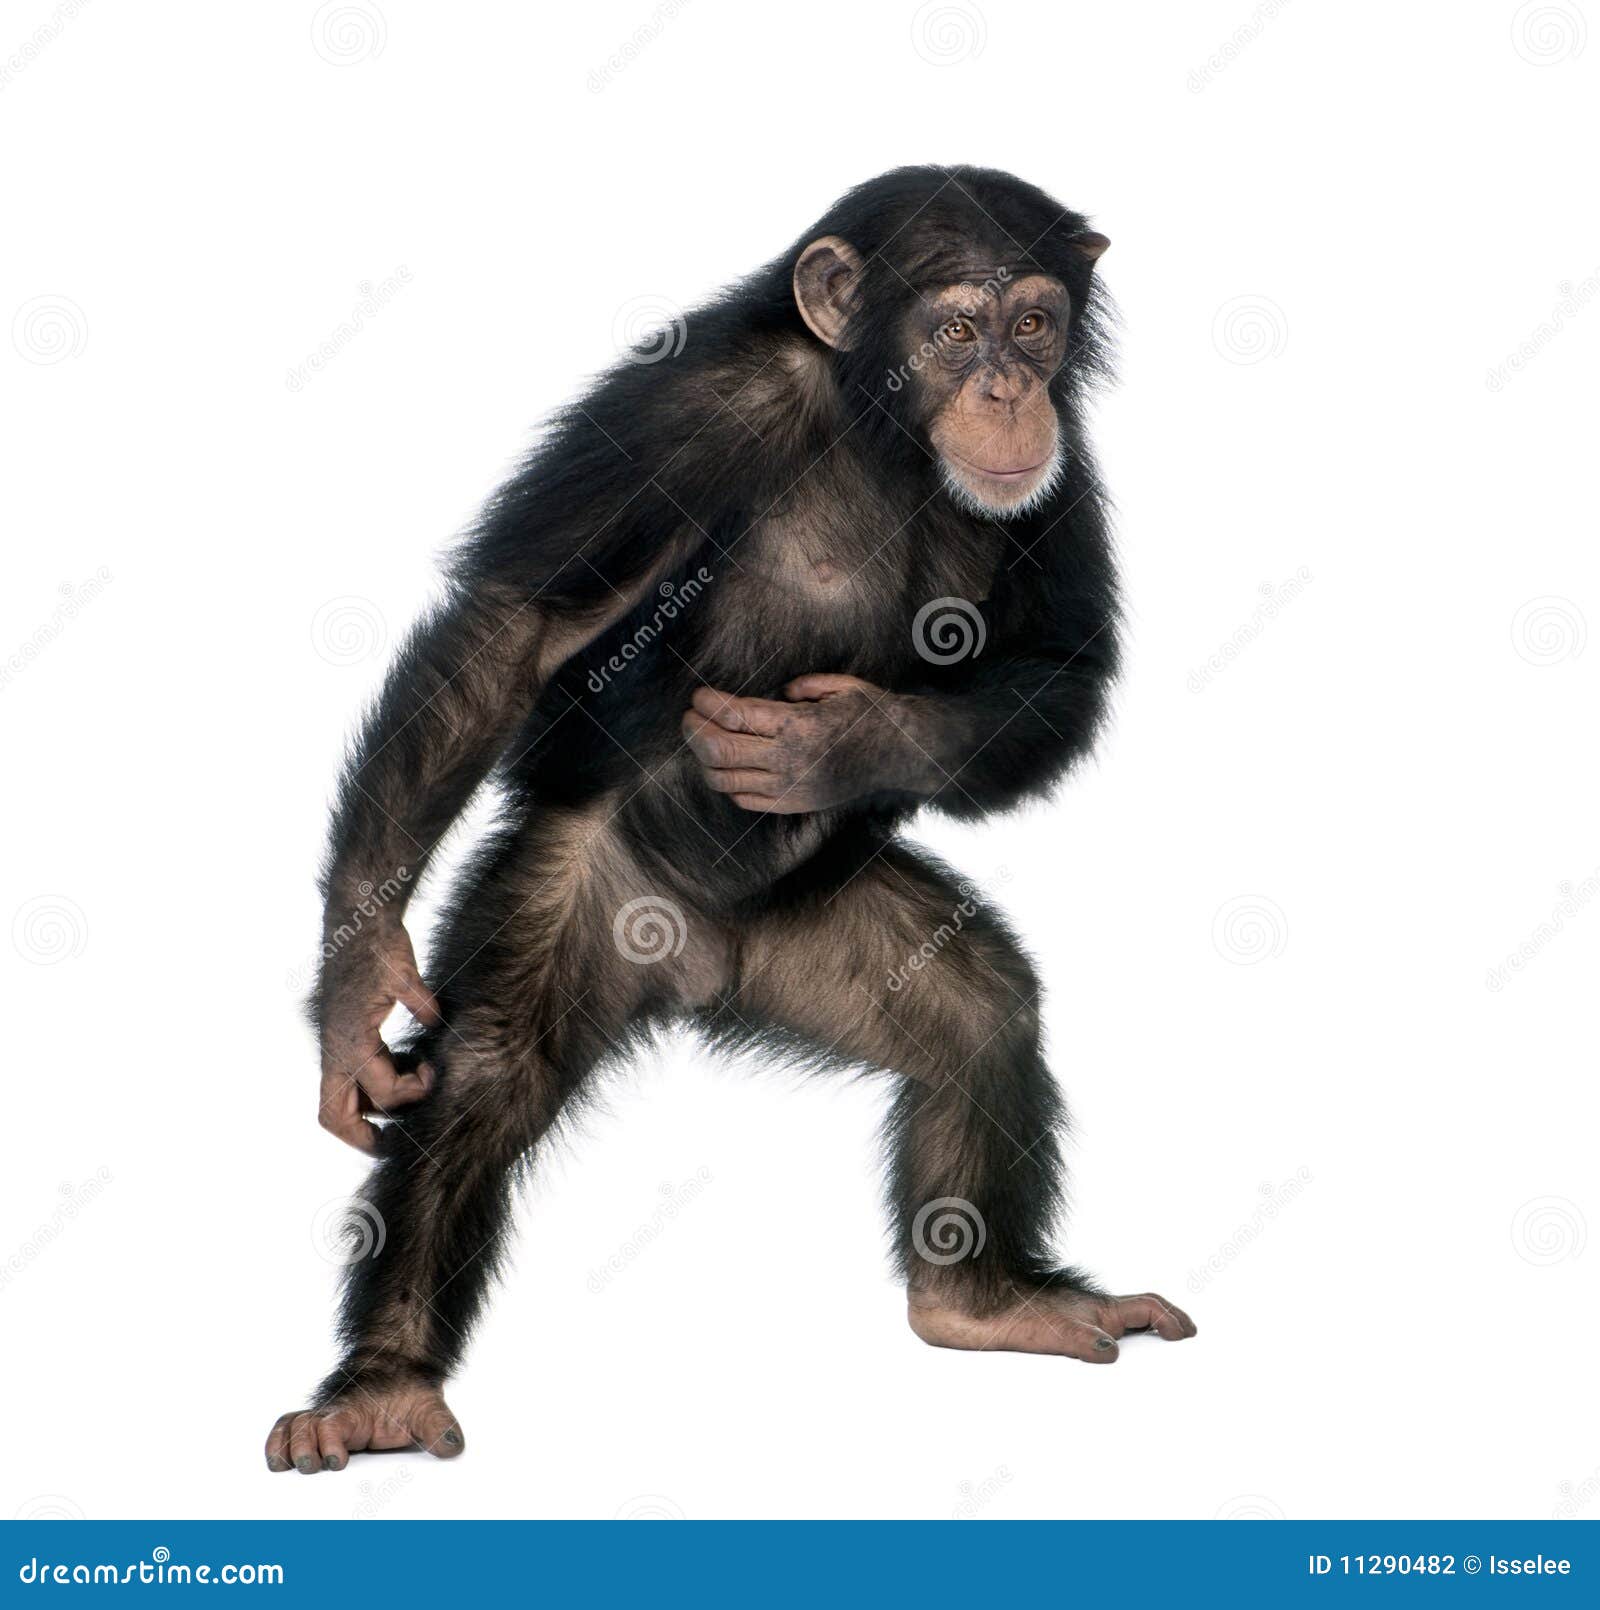 young chimpanzee against white background